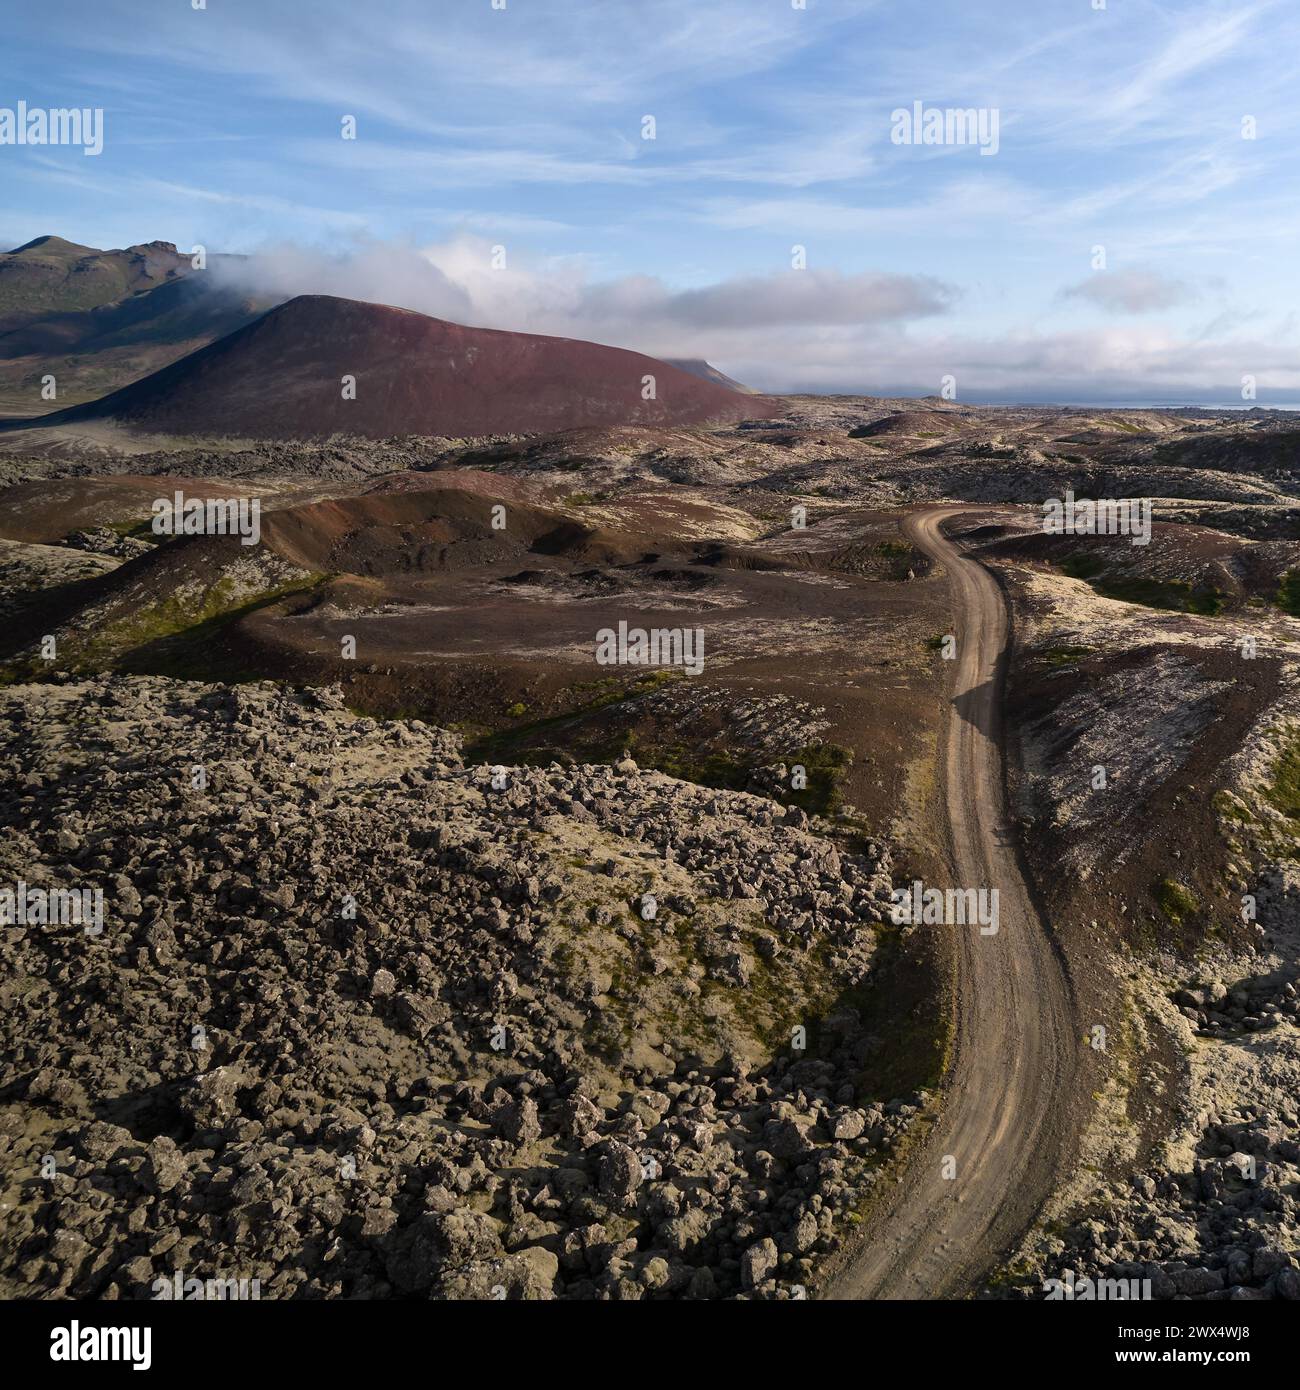 A view of the dirt road stretching to the horizon among the lava fields. Top view, photo taken from the drone. Helgafellssveit, Iceland. Stock Photo